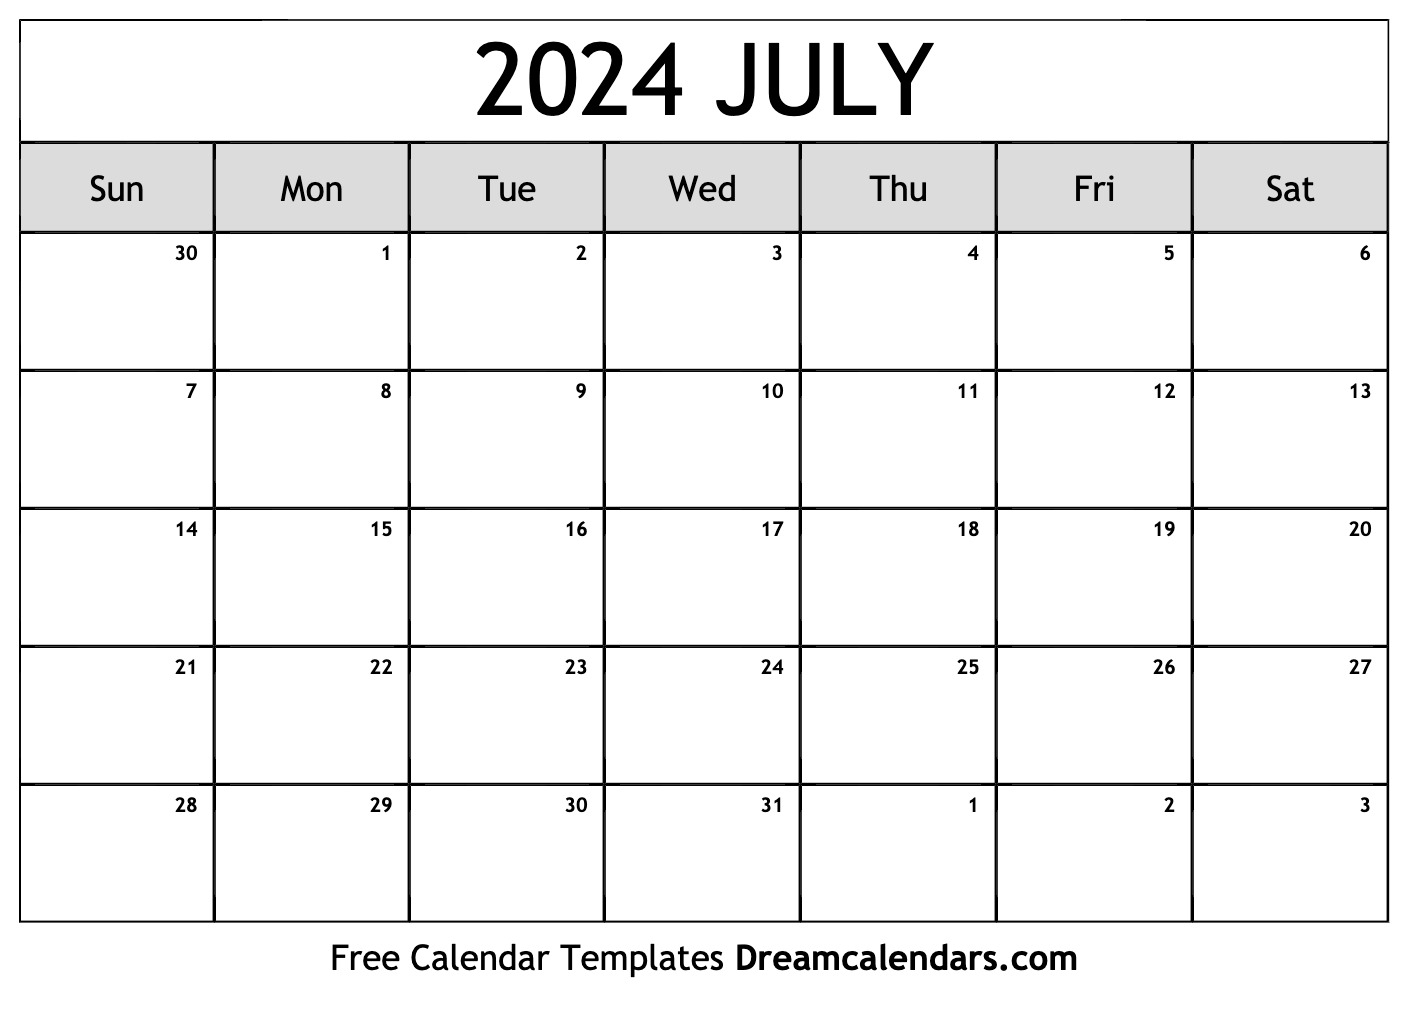 July 2024 Calendar | Free Blank Printable With Holidays for Monthly Calendar Printable July 2024